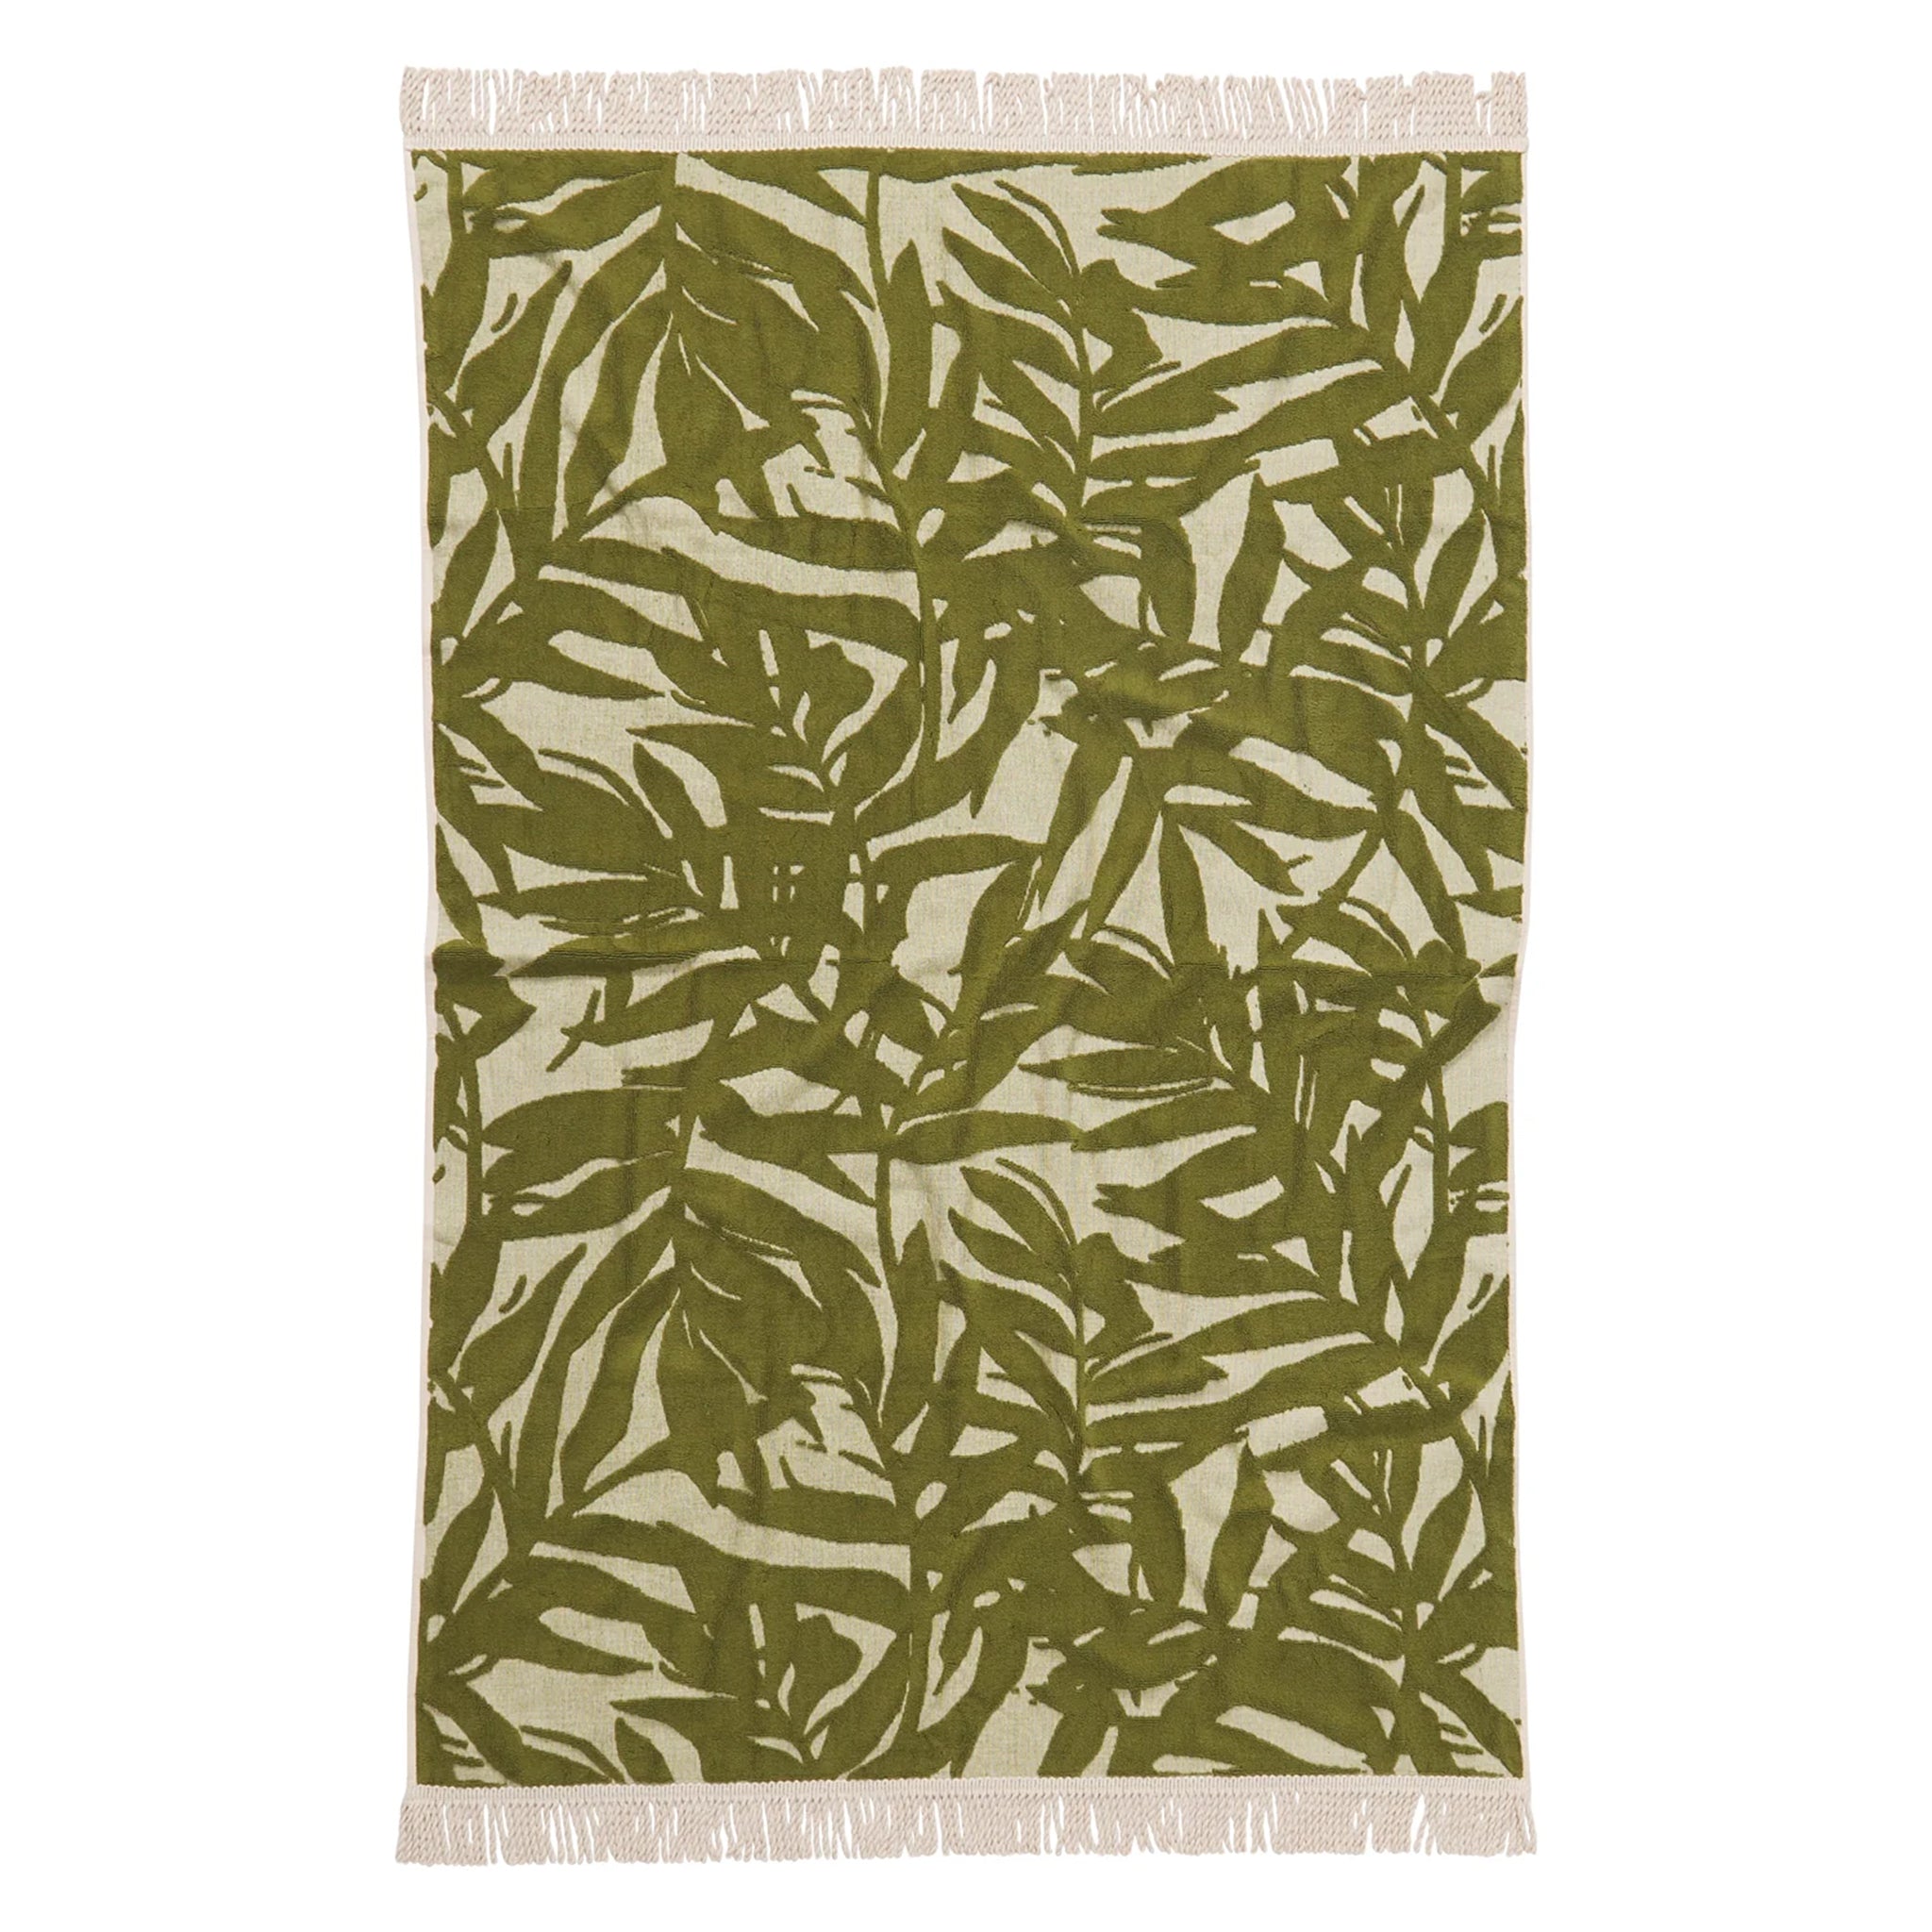 A green and ivory bamboo printed bath towel with tassel ends on both sides. 